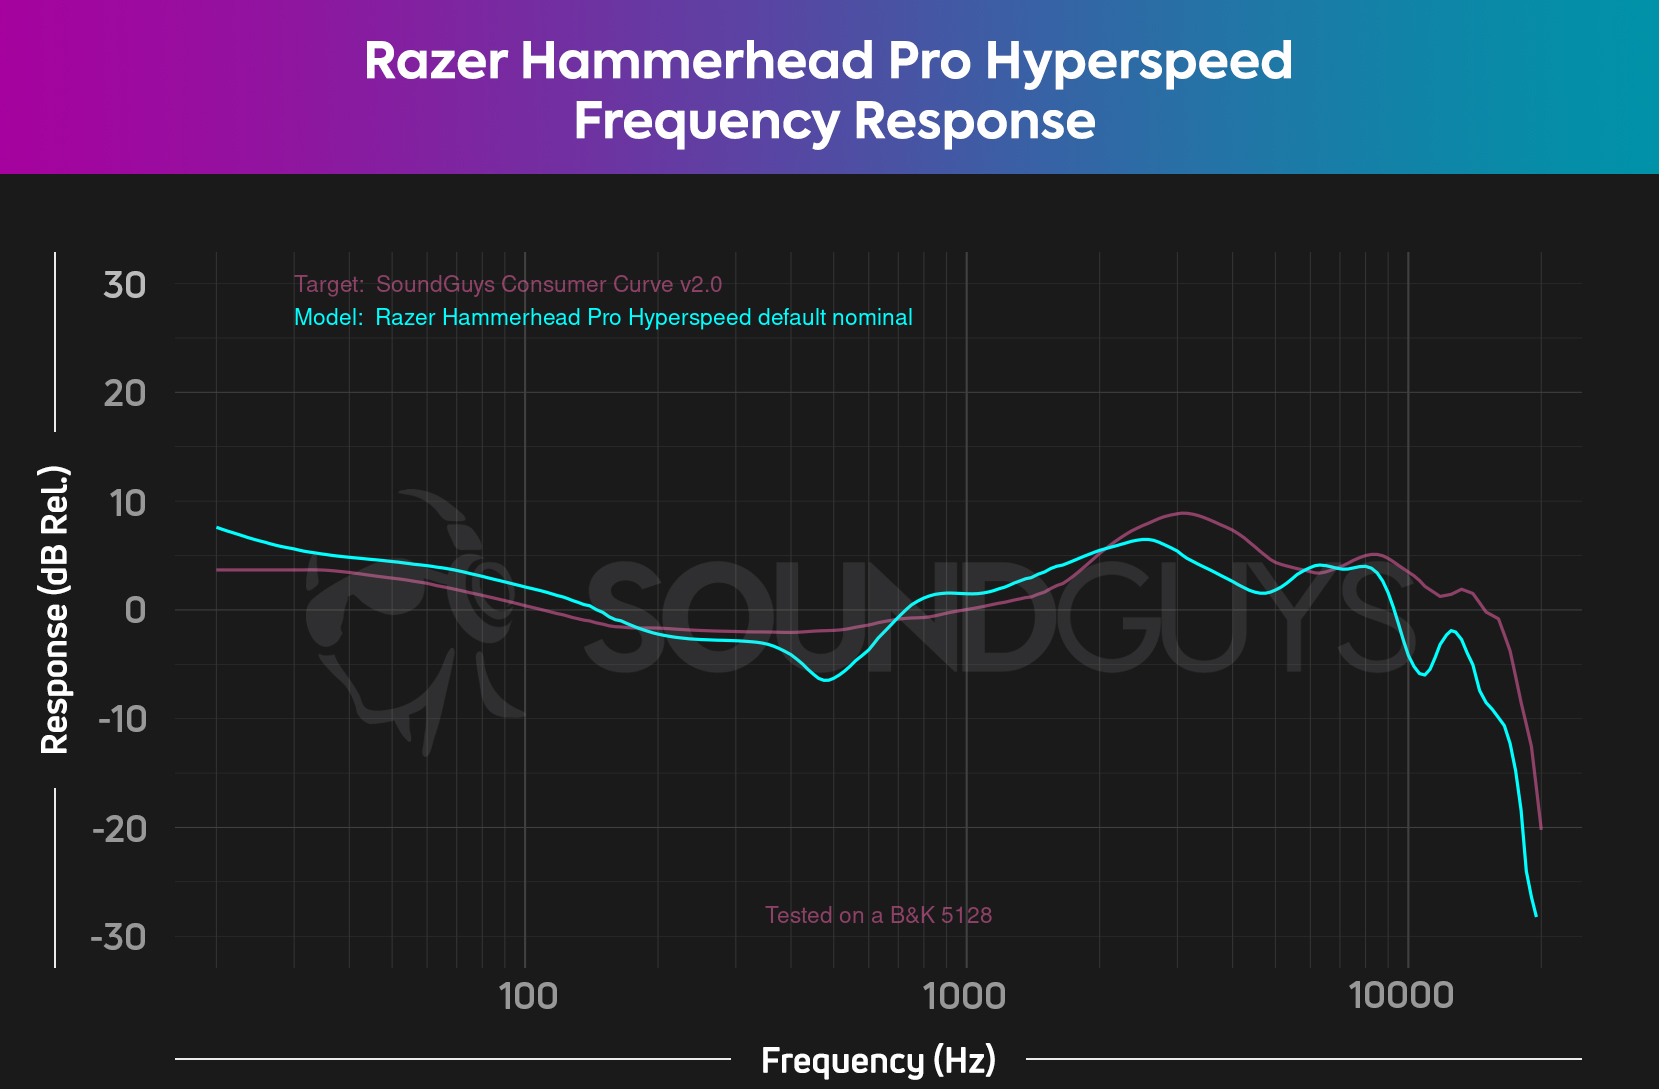 A chart of the Razer Hammerhead Pro Hyperspeed's default frequency response.